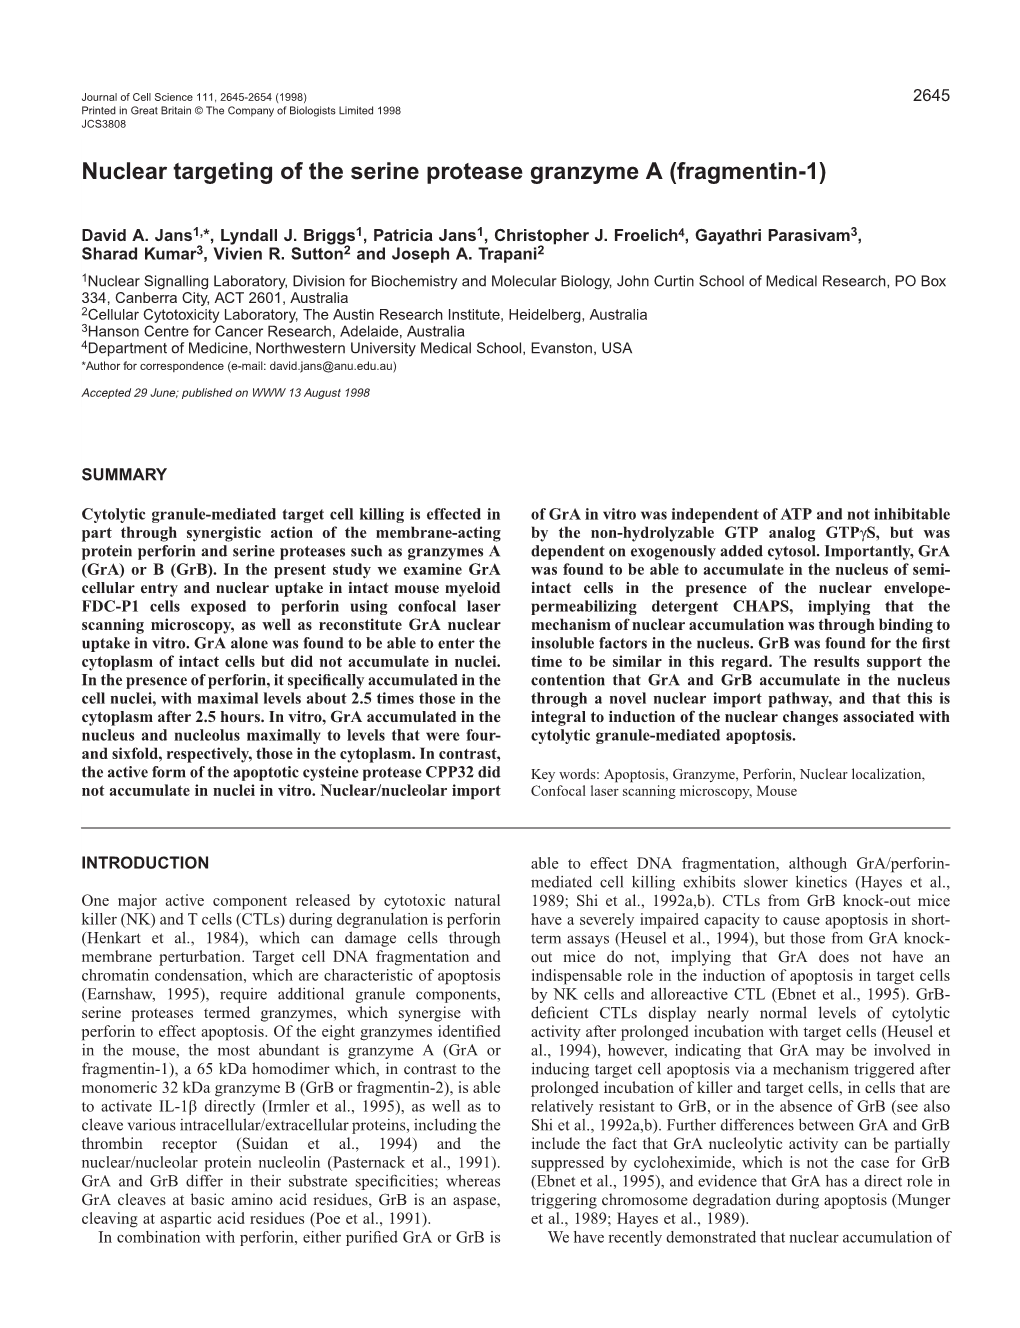 Nuclear Targeting of the Serine Protease Granzyme a (Fragmentin-1)